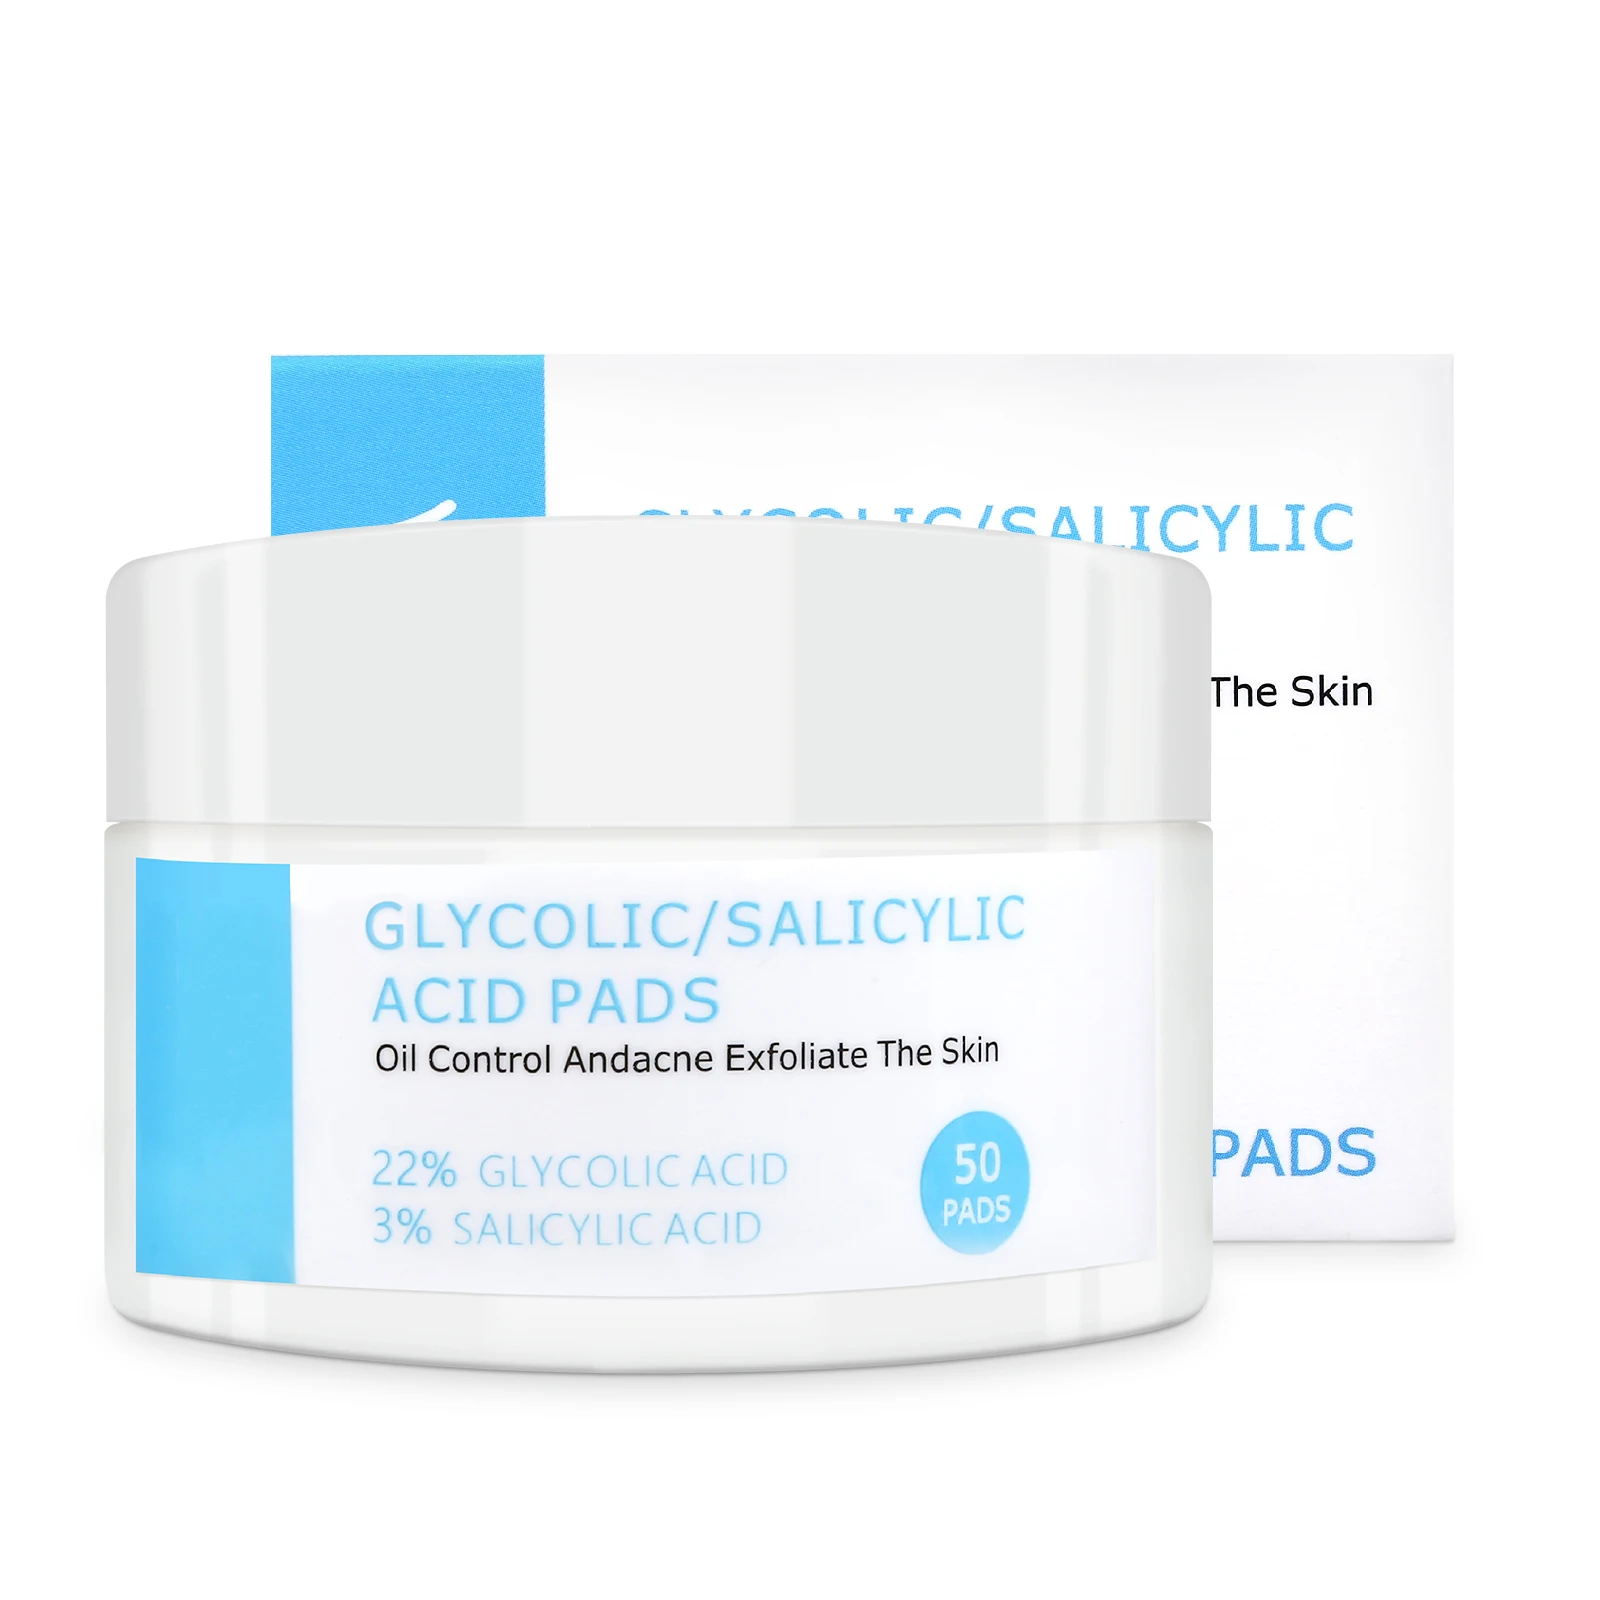 22% Glycolic Acid Pads Peel Pads 3% Salicylic Acid for Face Exfoliates Surface Skin Reduces Fine Lines Wrinkles Dark Spots Acne